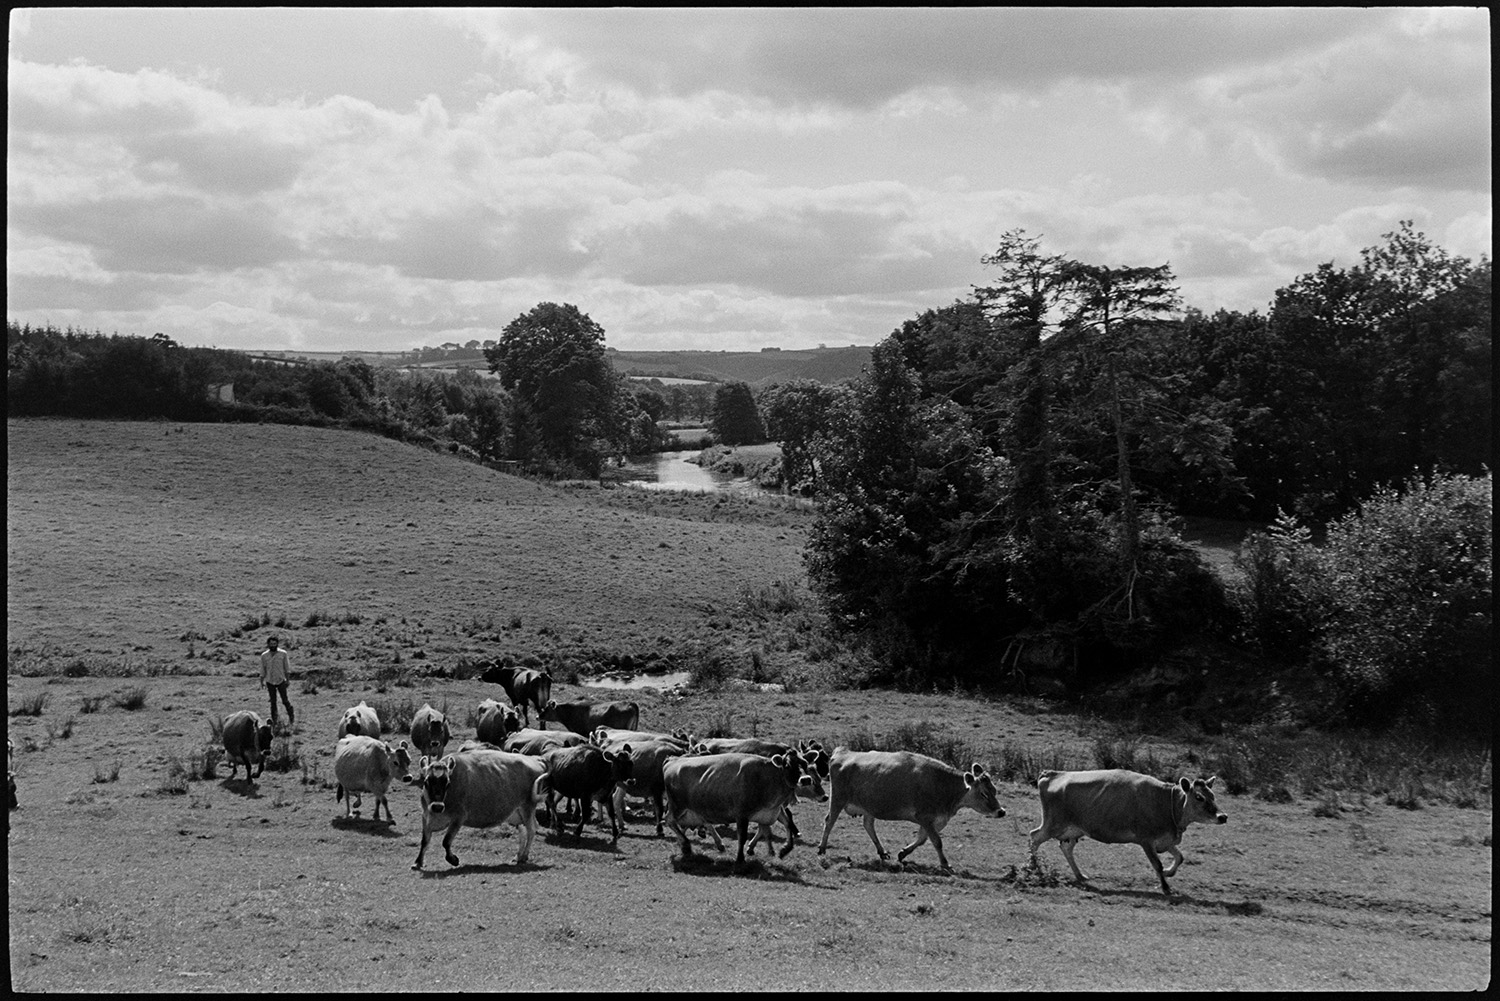 Farmer, cheesemaker bringing in herd of cows to be milked. 
[Peter Charnley herding cows through a field at Park farm, Umberleigh, to go to be milked. A river and trees can be seen in the background.]